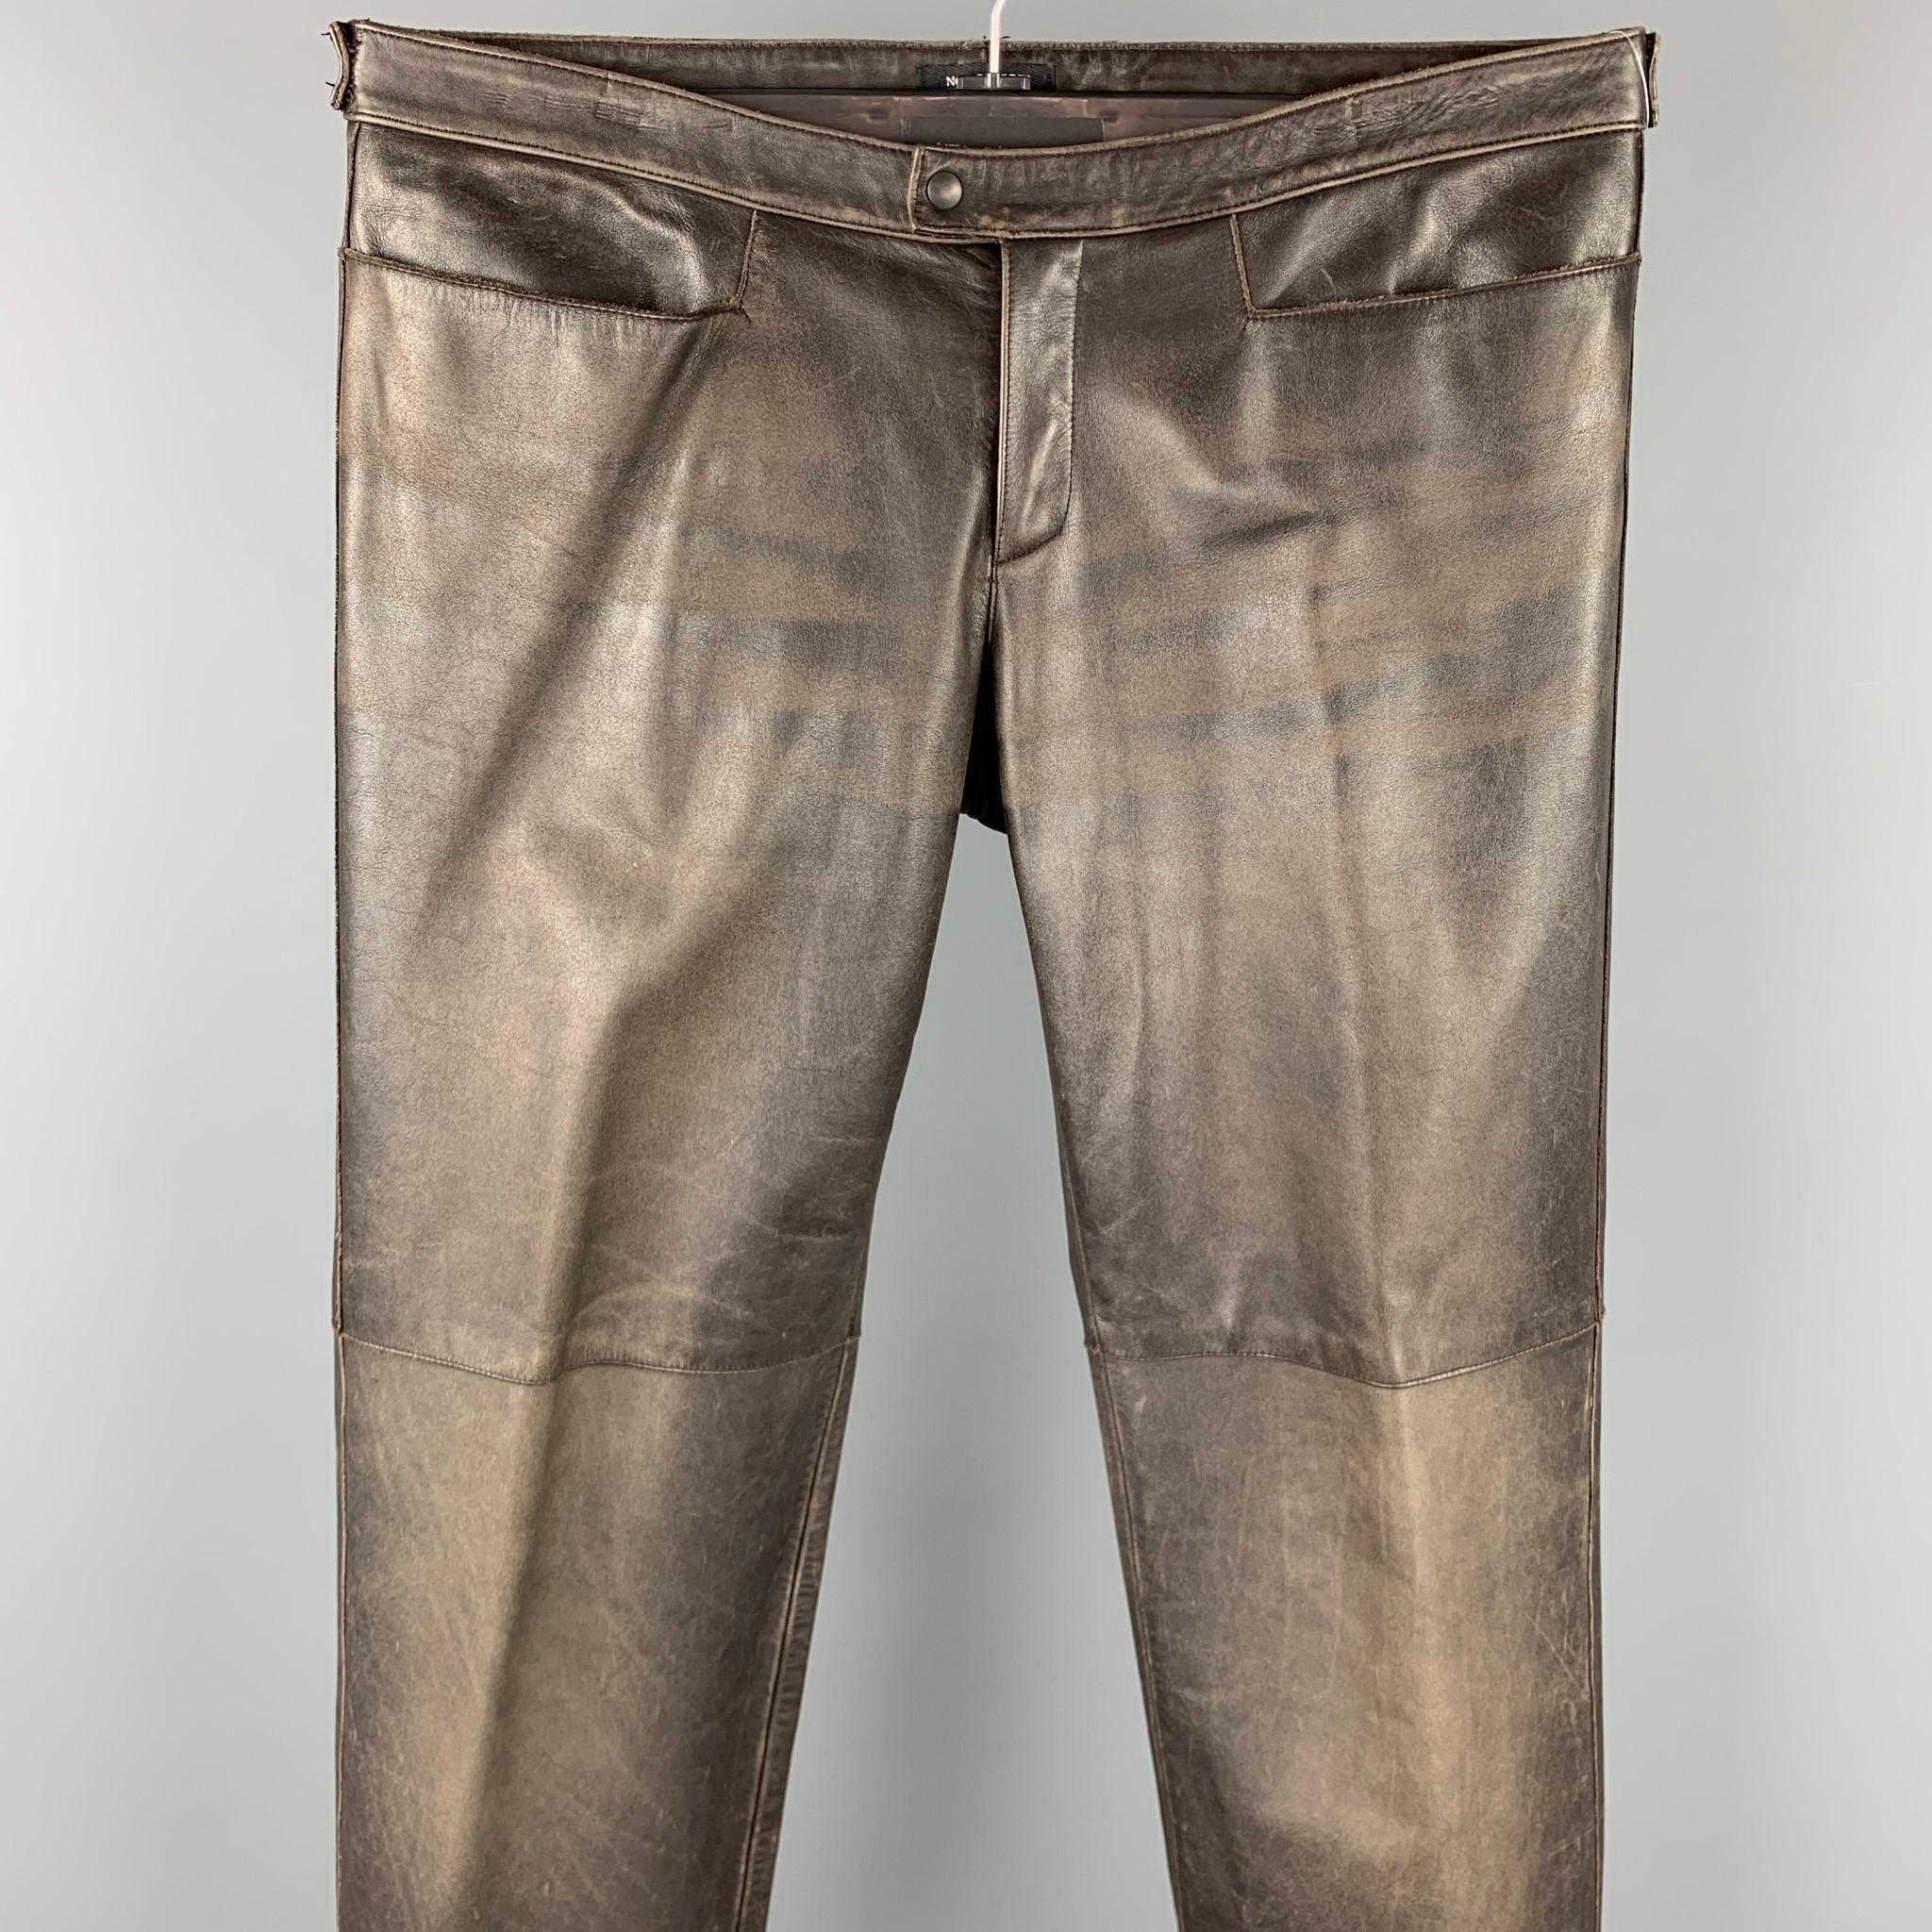 NEIL BARRETT casual pants comes in a brown distressed leather featuring a straight leg, top stitching, snap button, and a zip fly closure. Made in Italy.

Very Good Pre-Owned Condition.
Marked: M

Measurements:

Waist: 34 in. 
Rise: 6.5 in. 
Inseam: